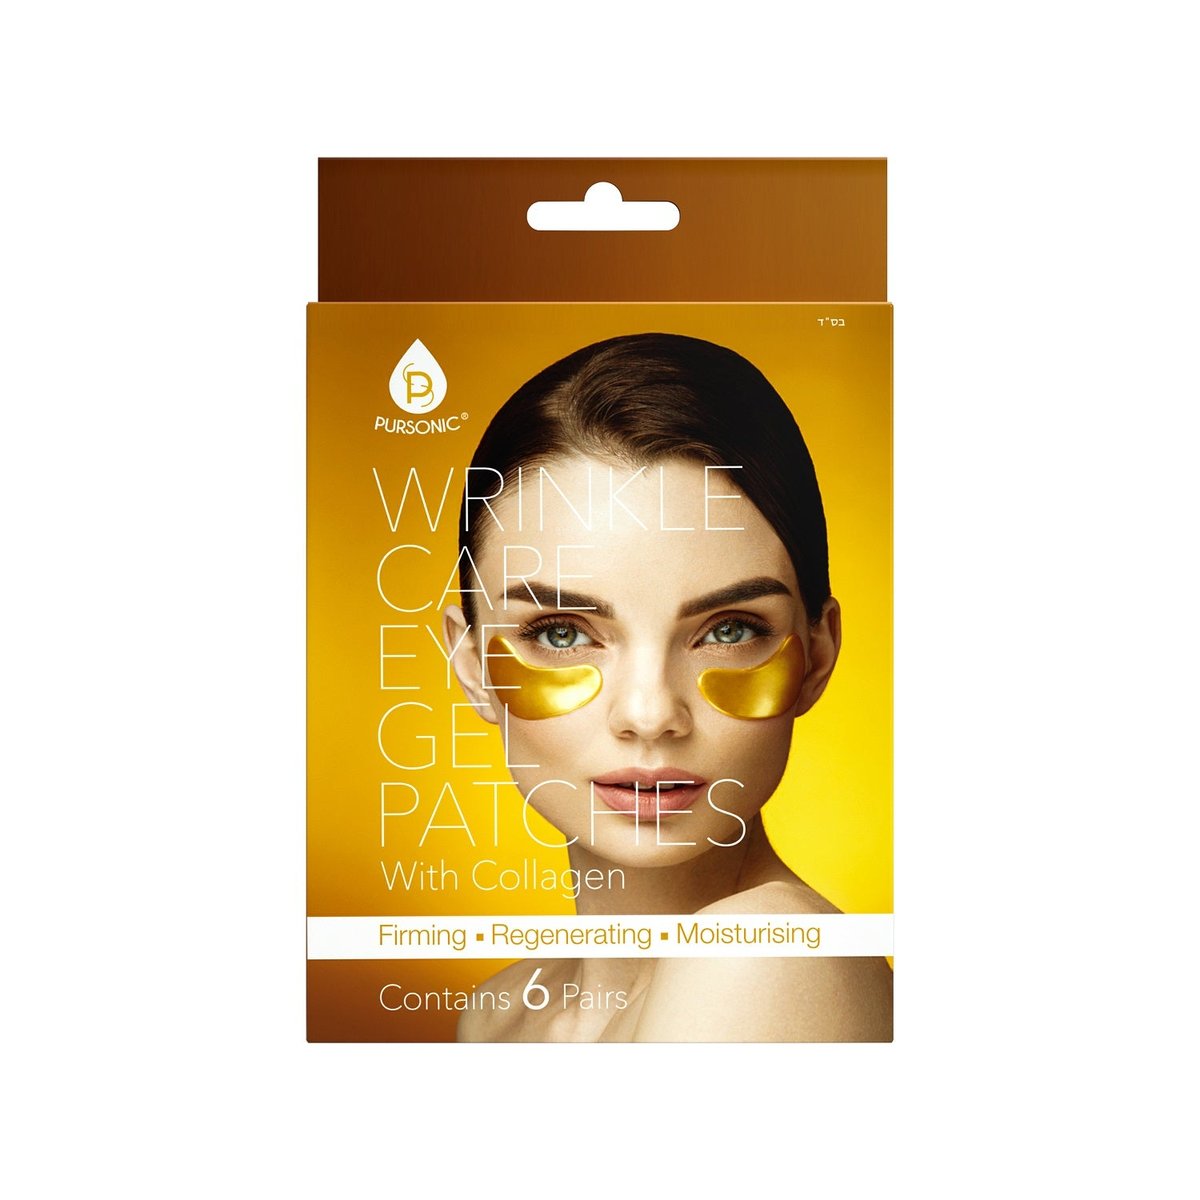 PURSONIC Wrinkle Care Eye Gel Patches